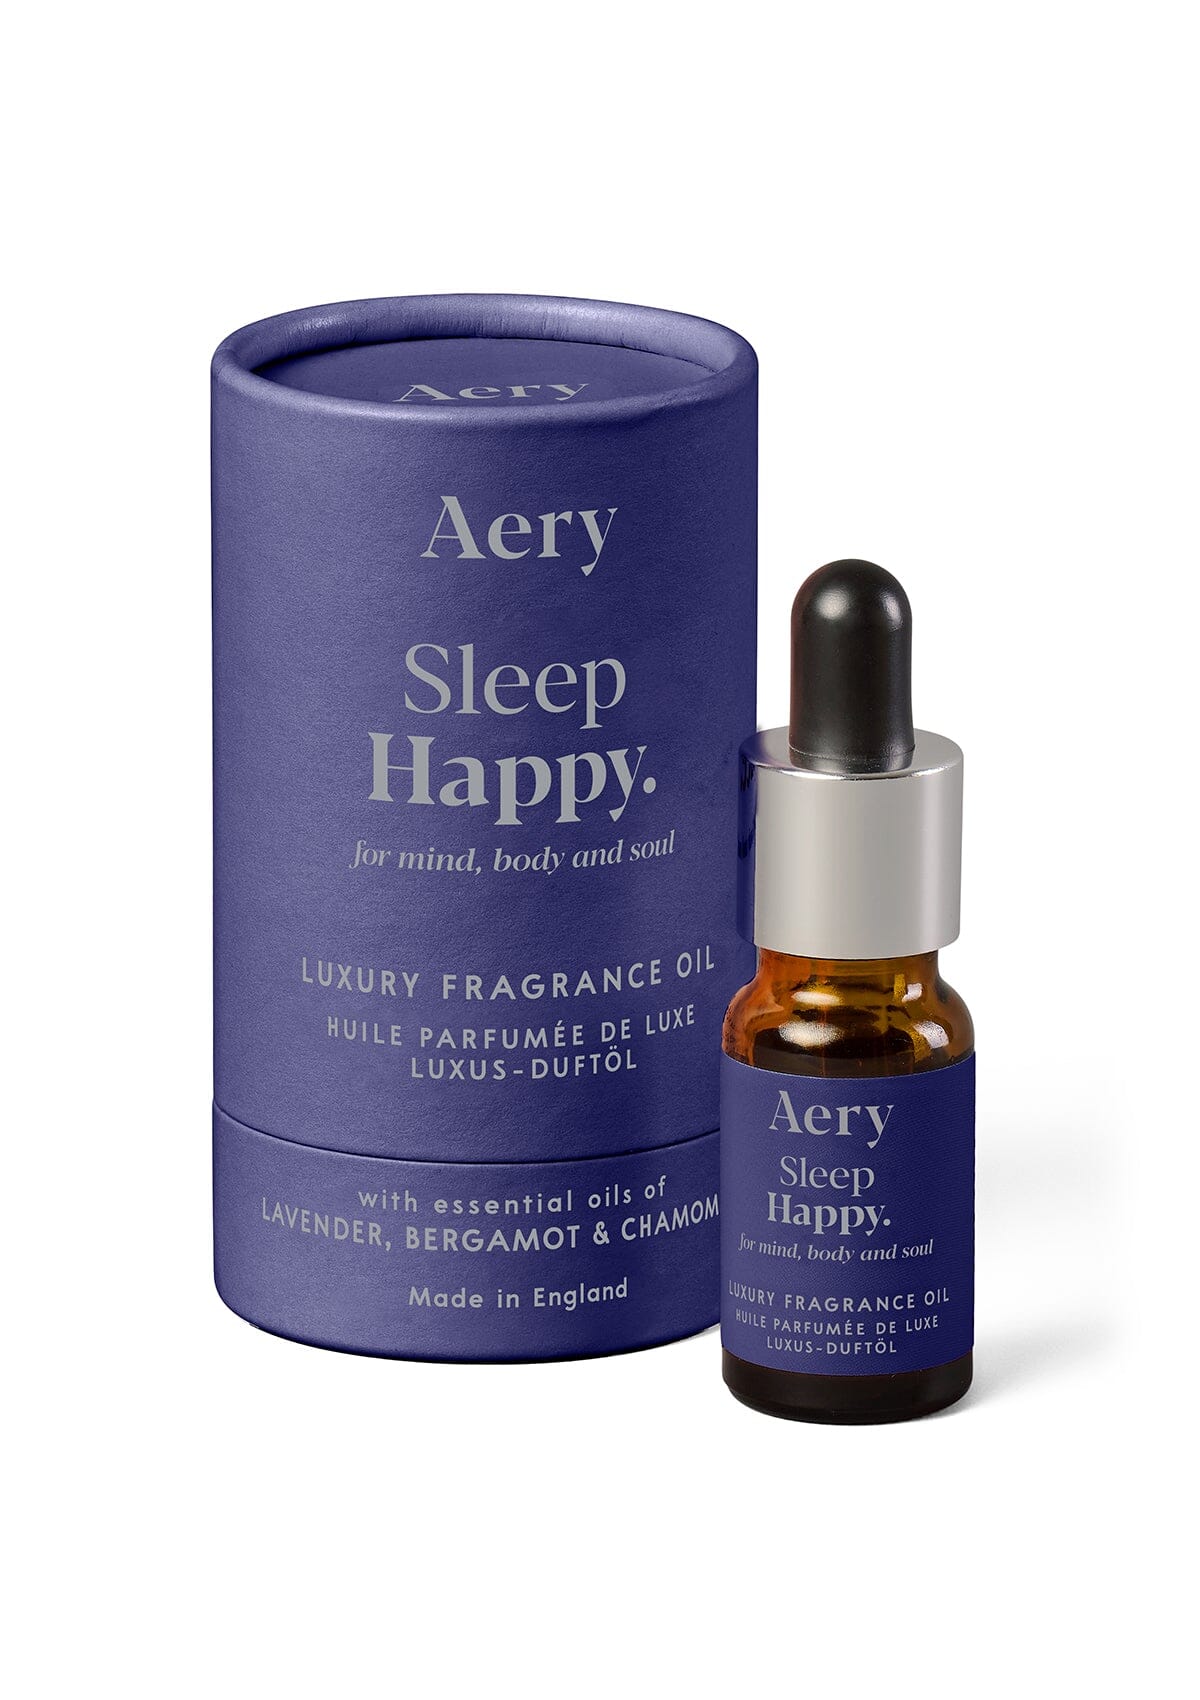 Blue Sleep Happy fragrance oil displayed next to product packaging by Aery on white background 